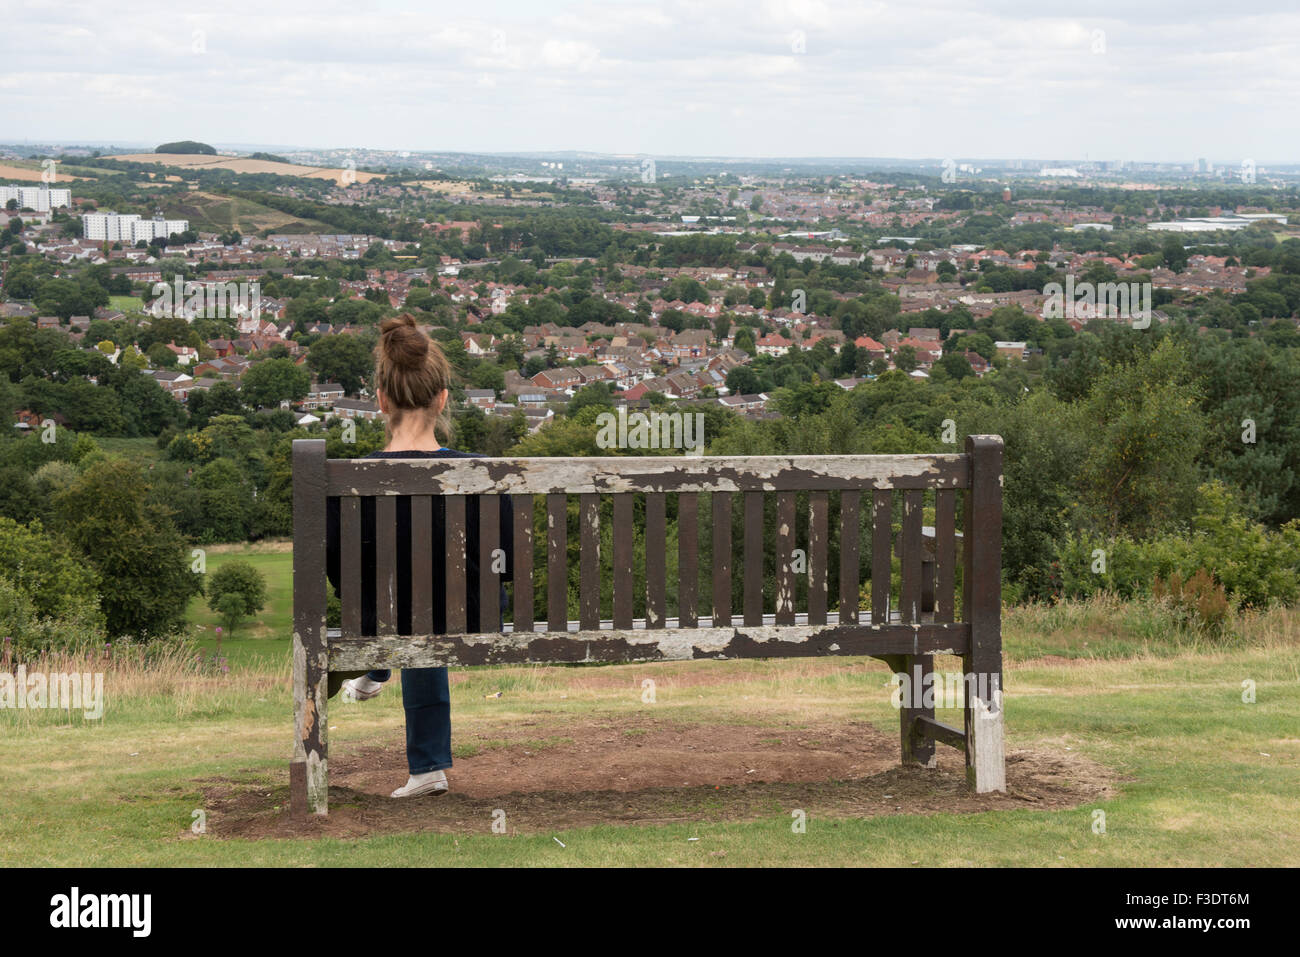 Lady Looking at the City from Afar Stock Photo